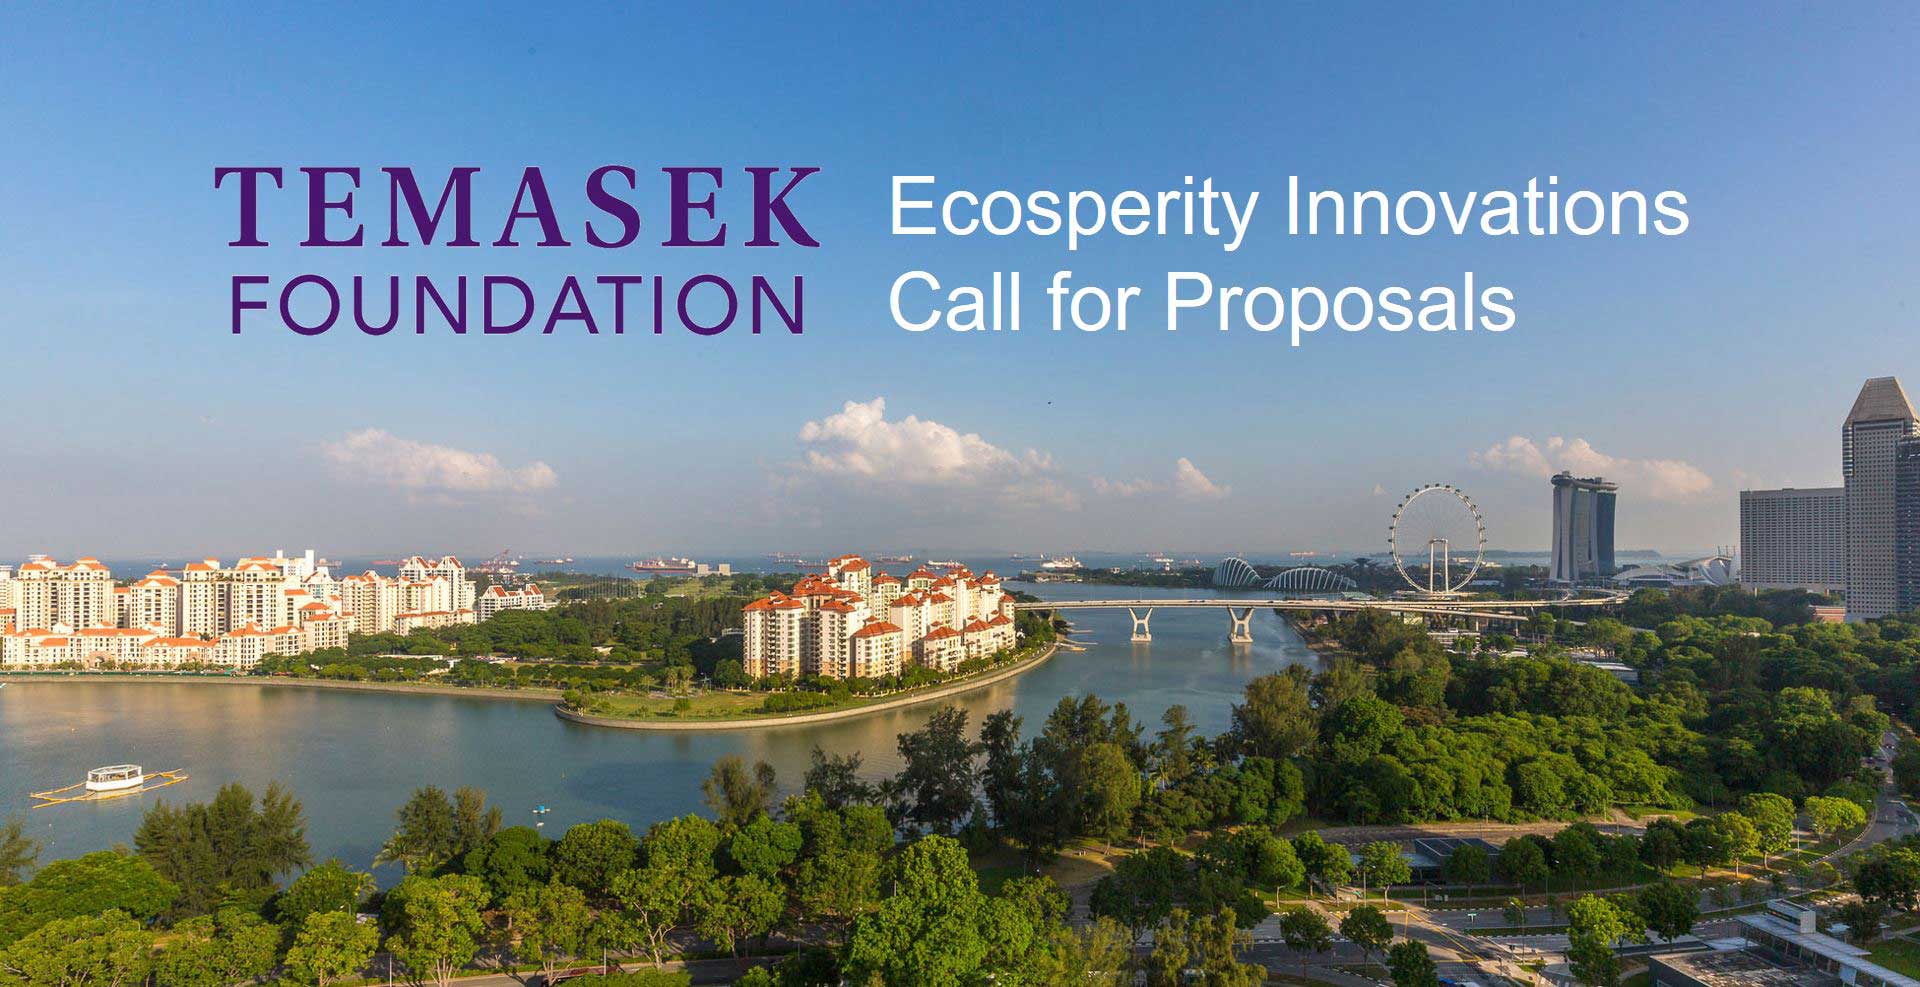 Temasek Foundation Eighth Ecosperity Innovations Call for Proposals